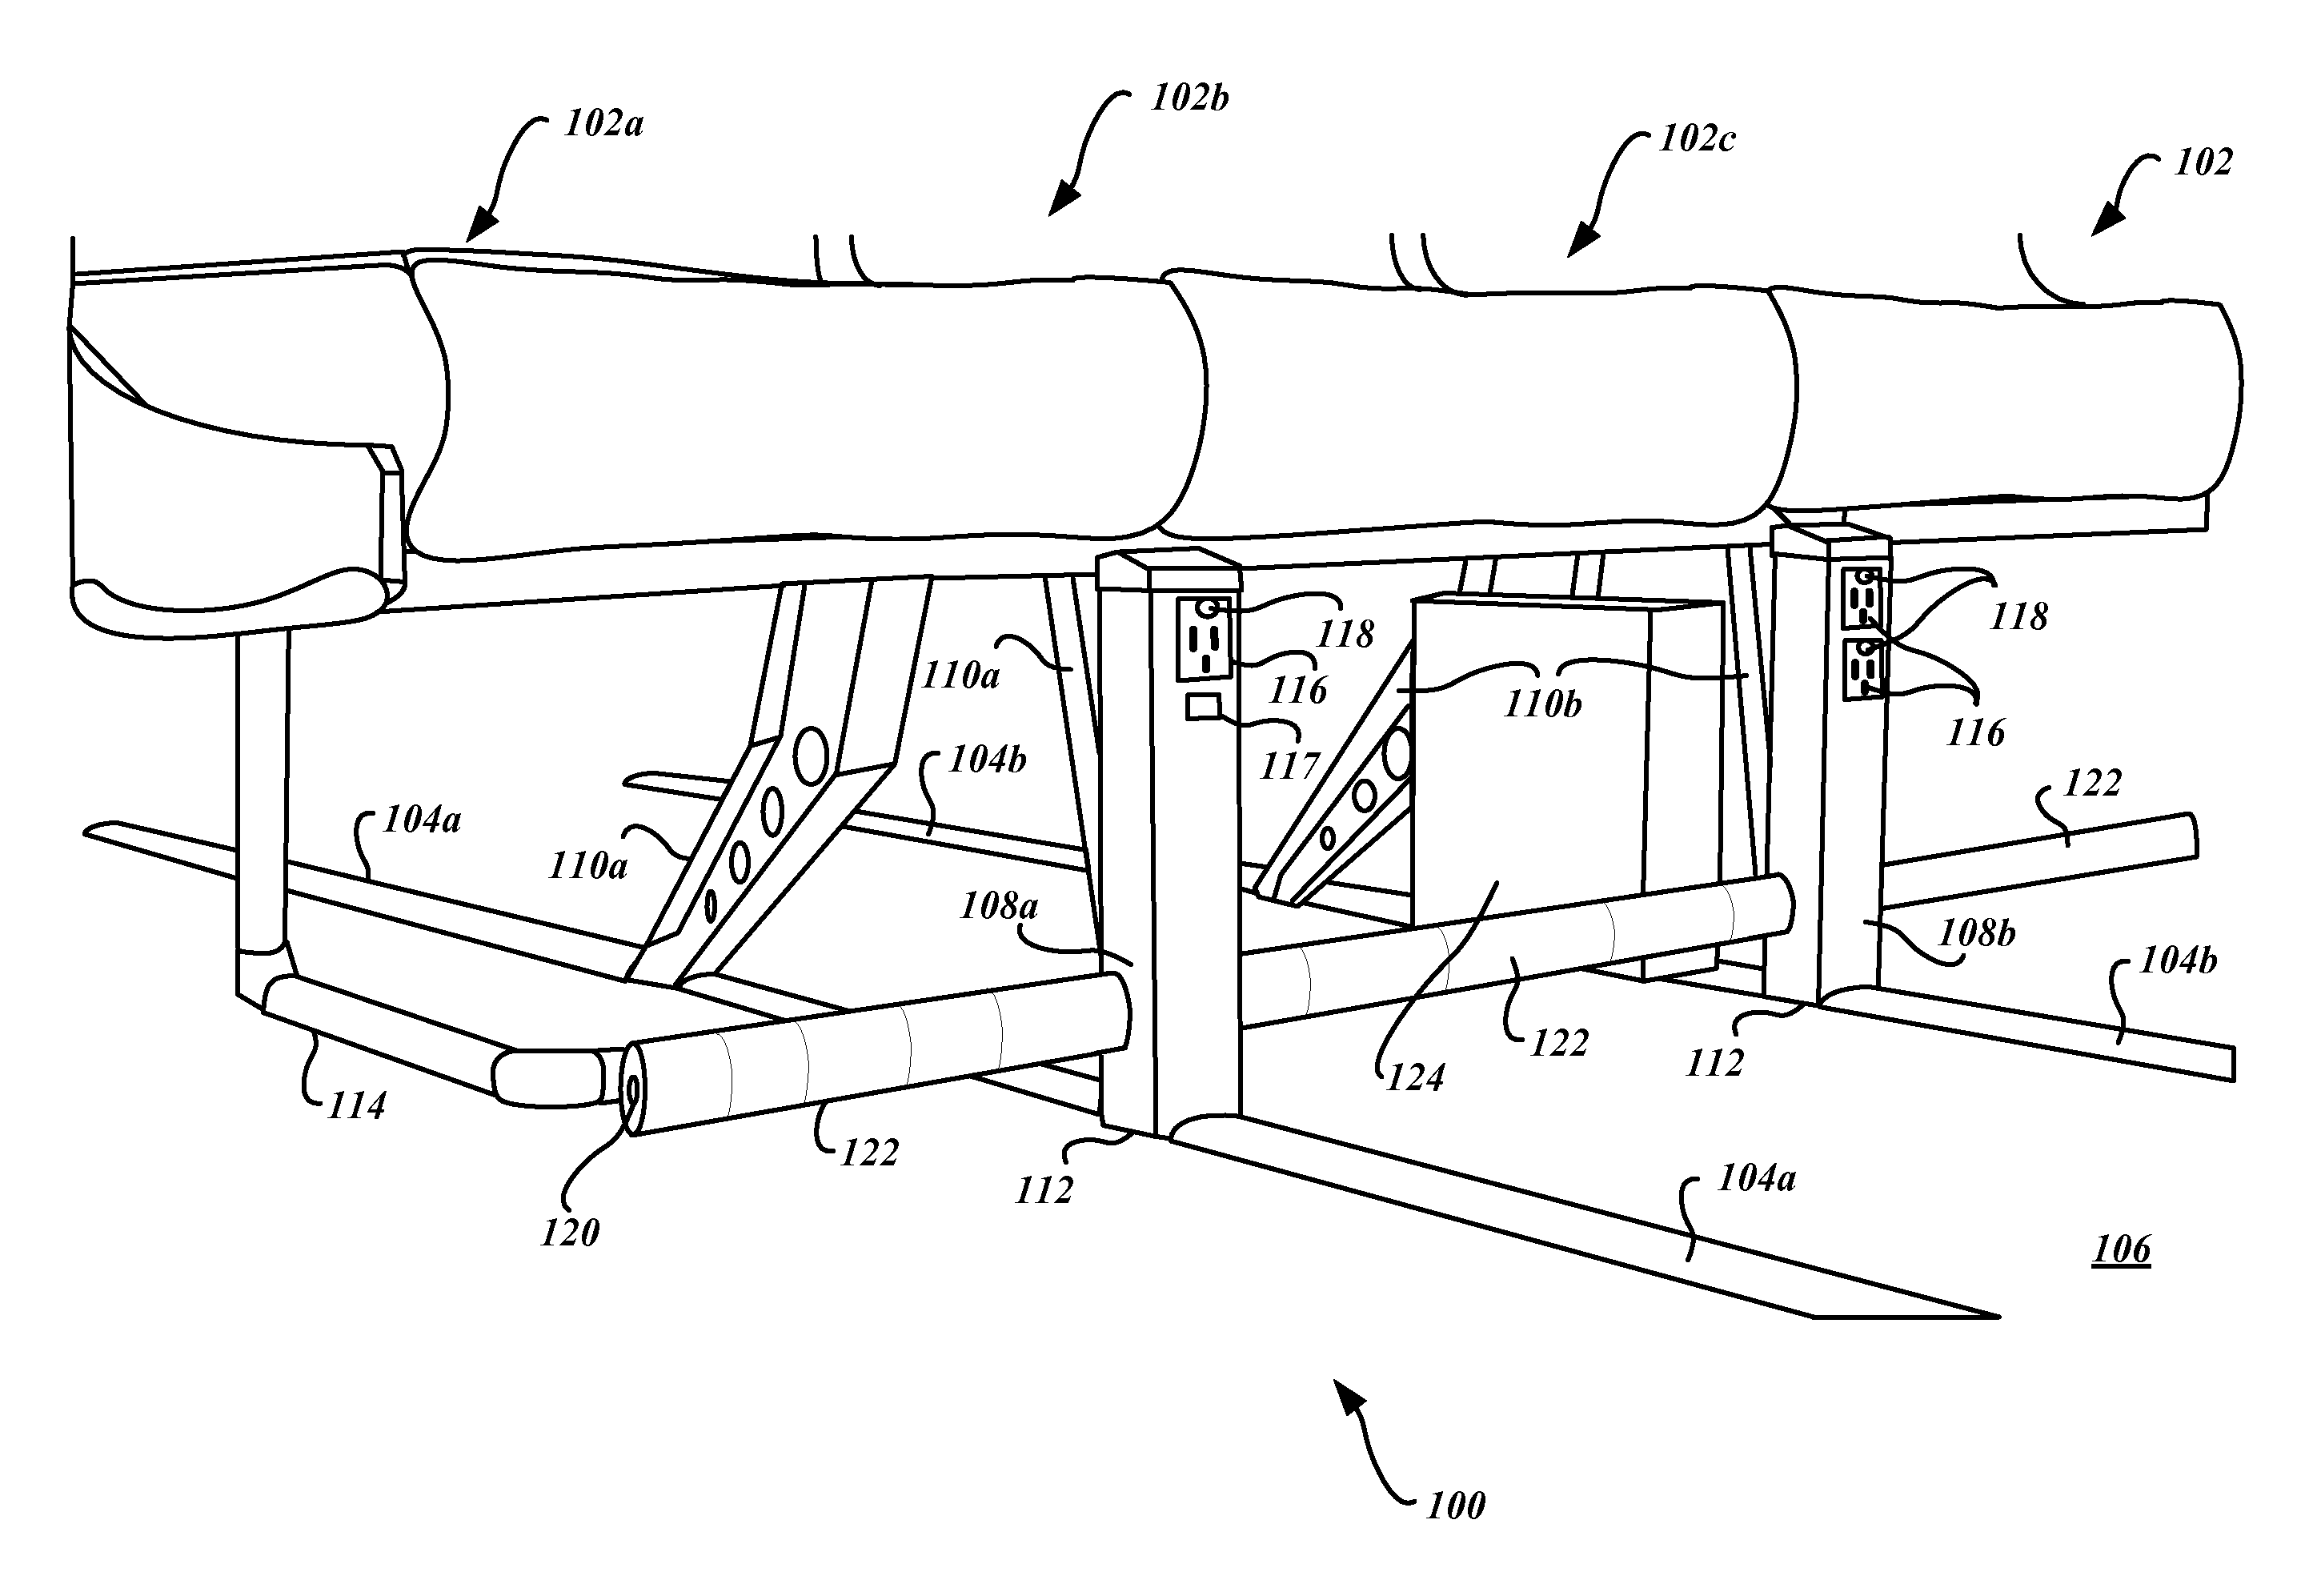 Systems and methods for securing and protecting aircraft line replaceable units with status indicator under a passenger seat